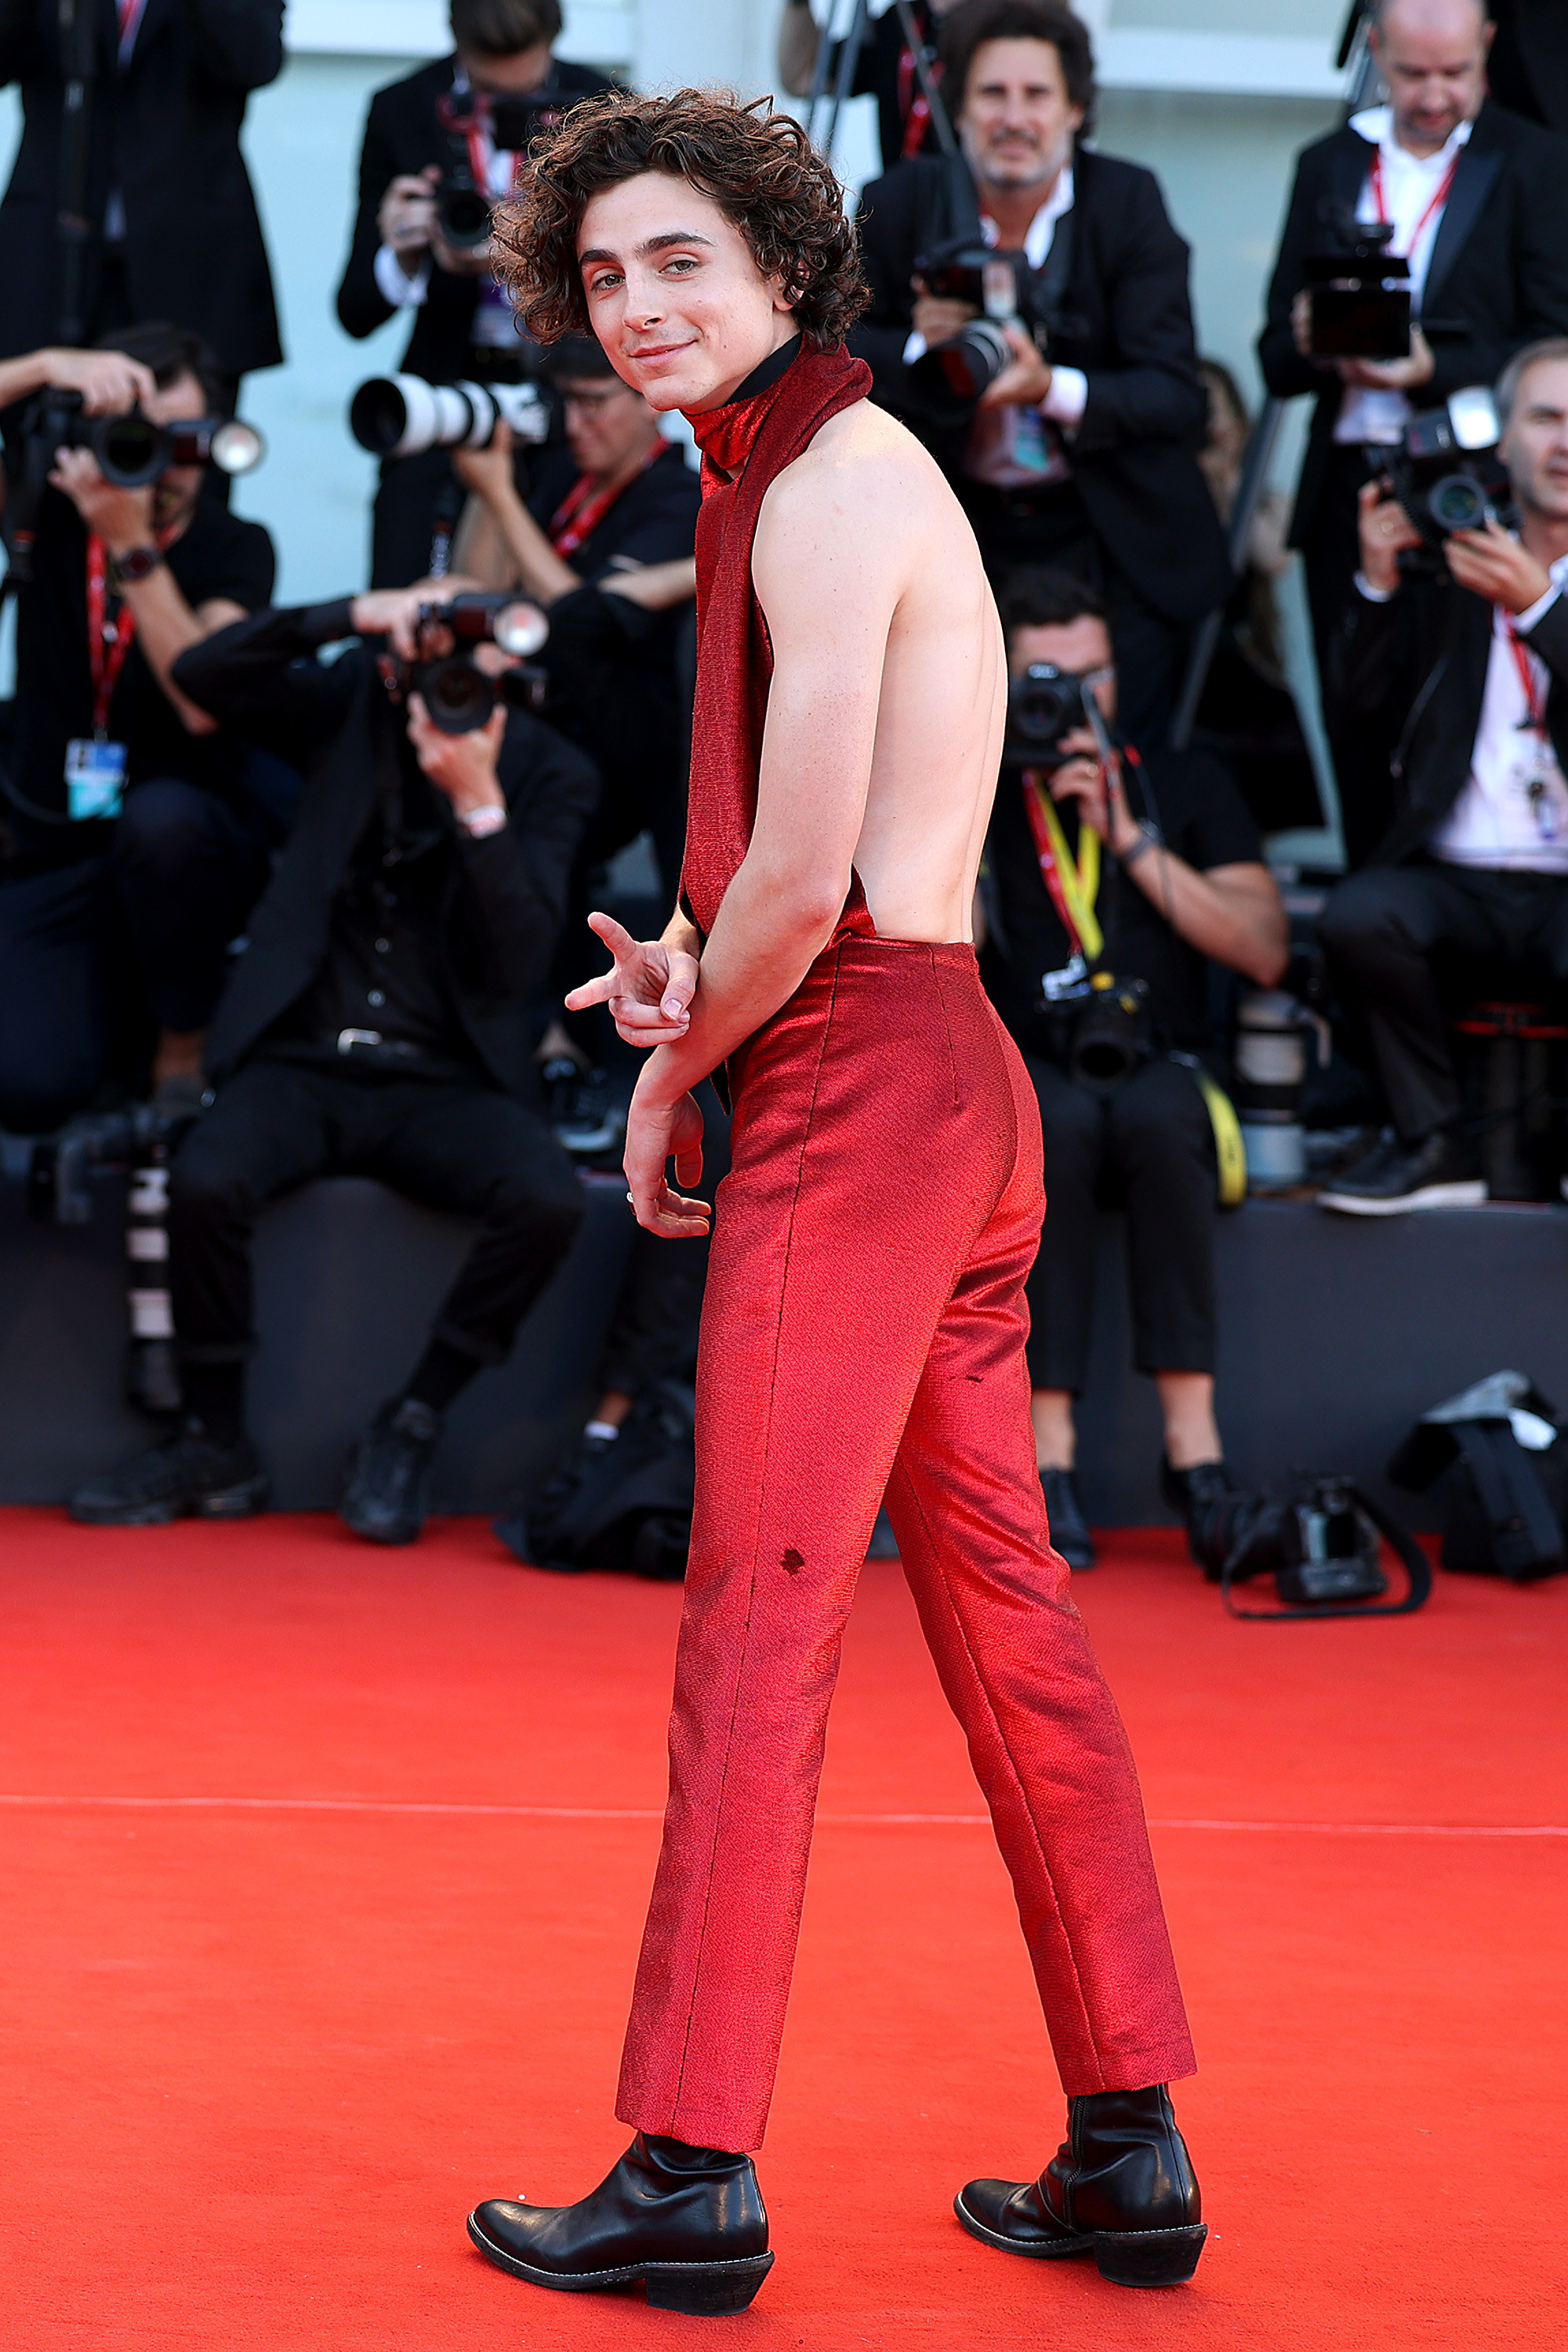 timotee smiling in the outfit on the red carpet